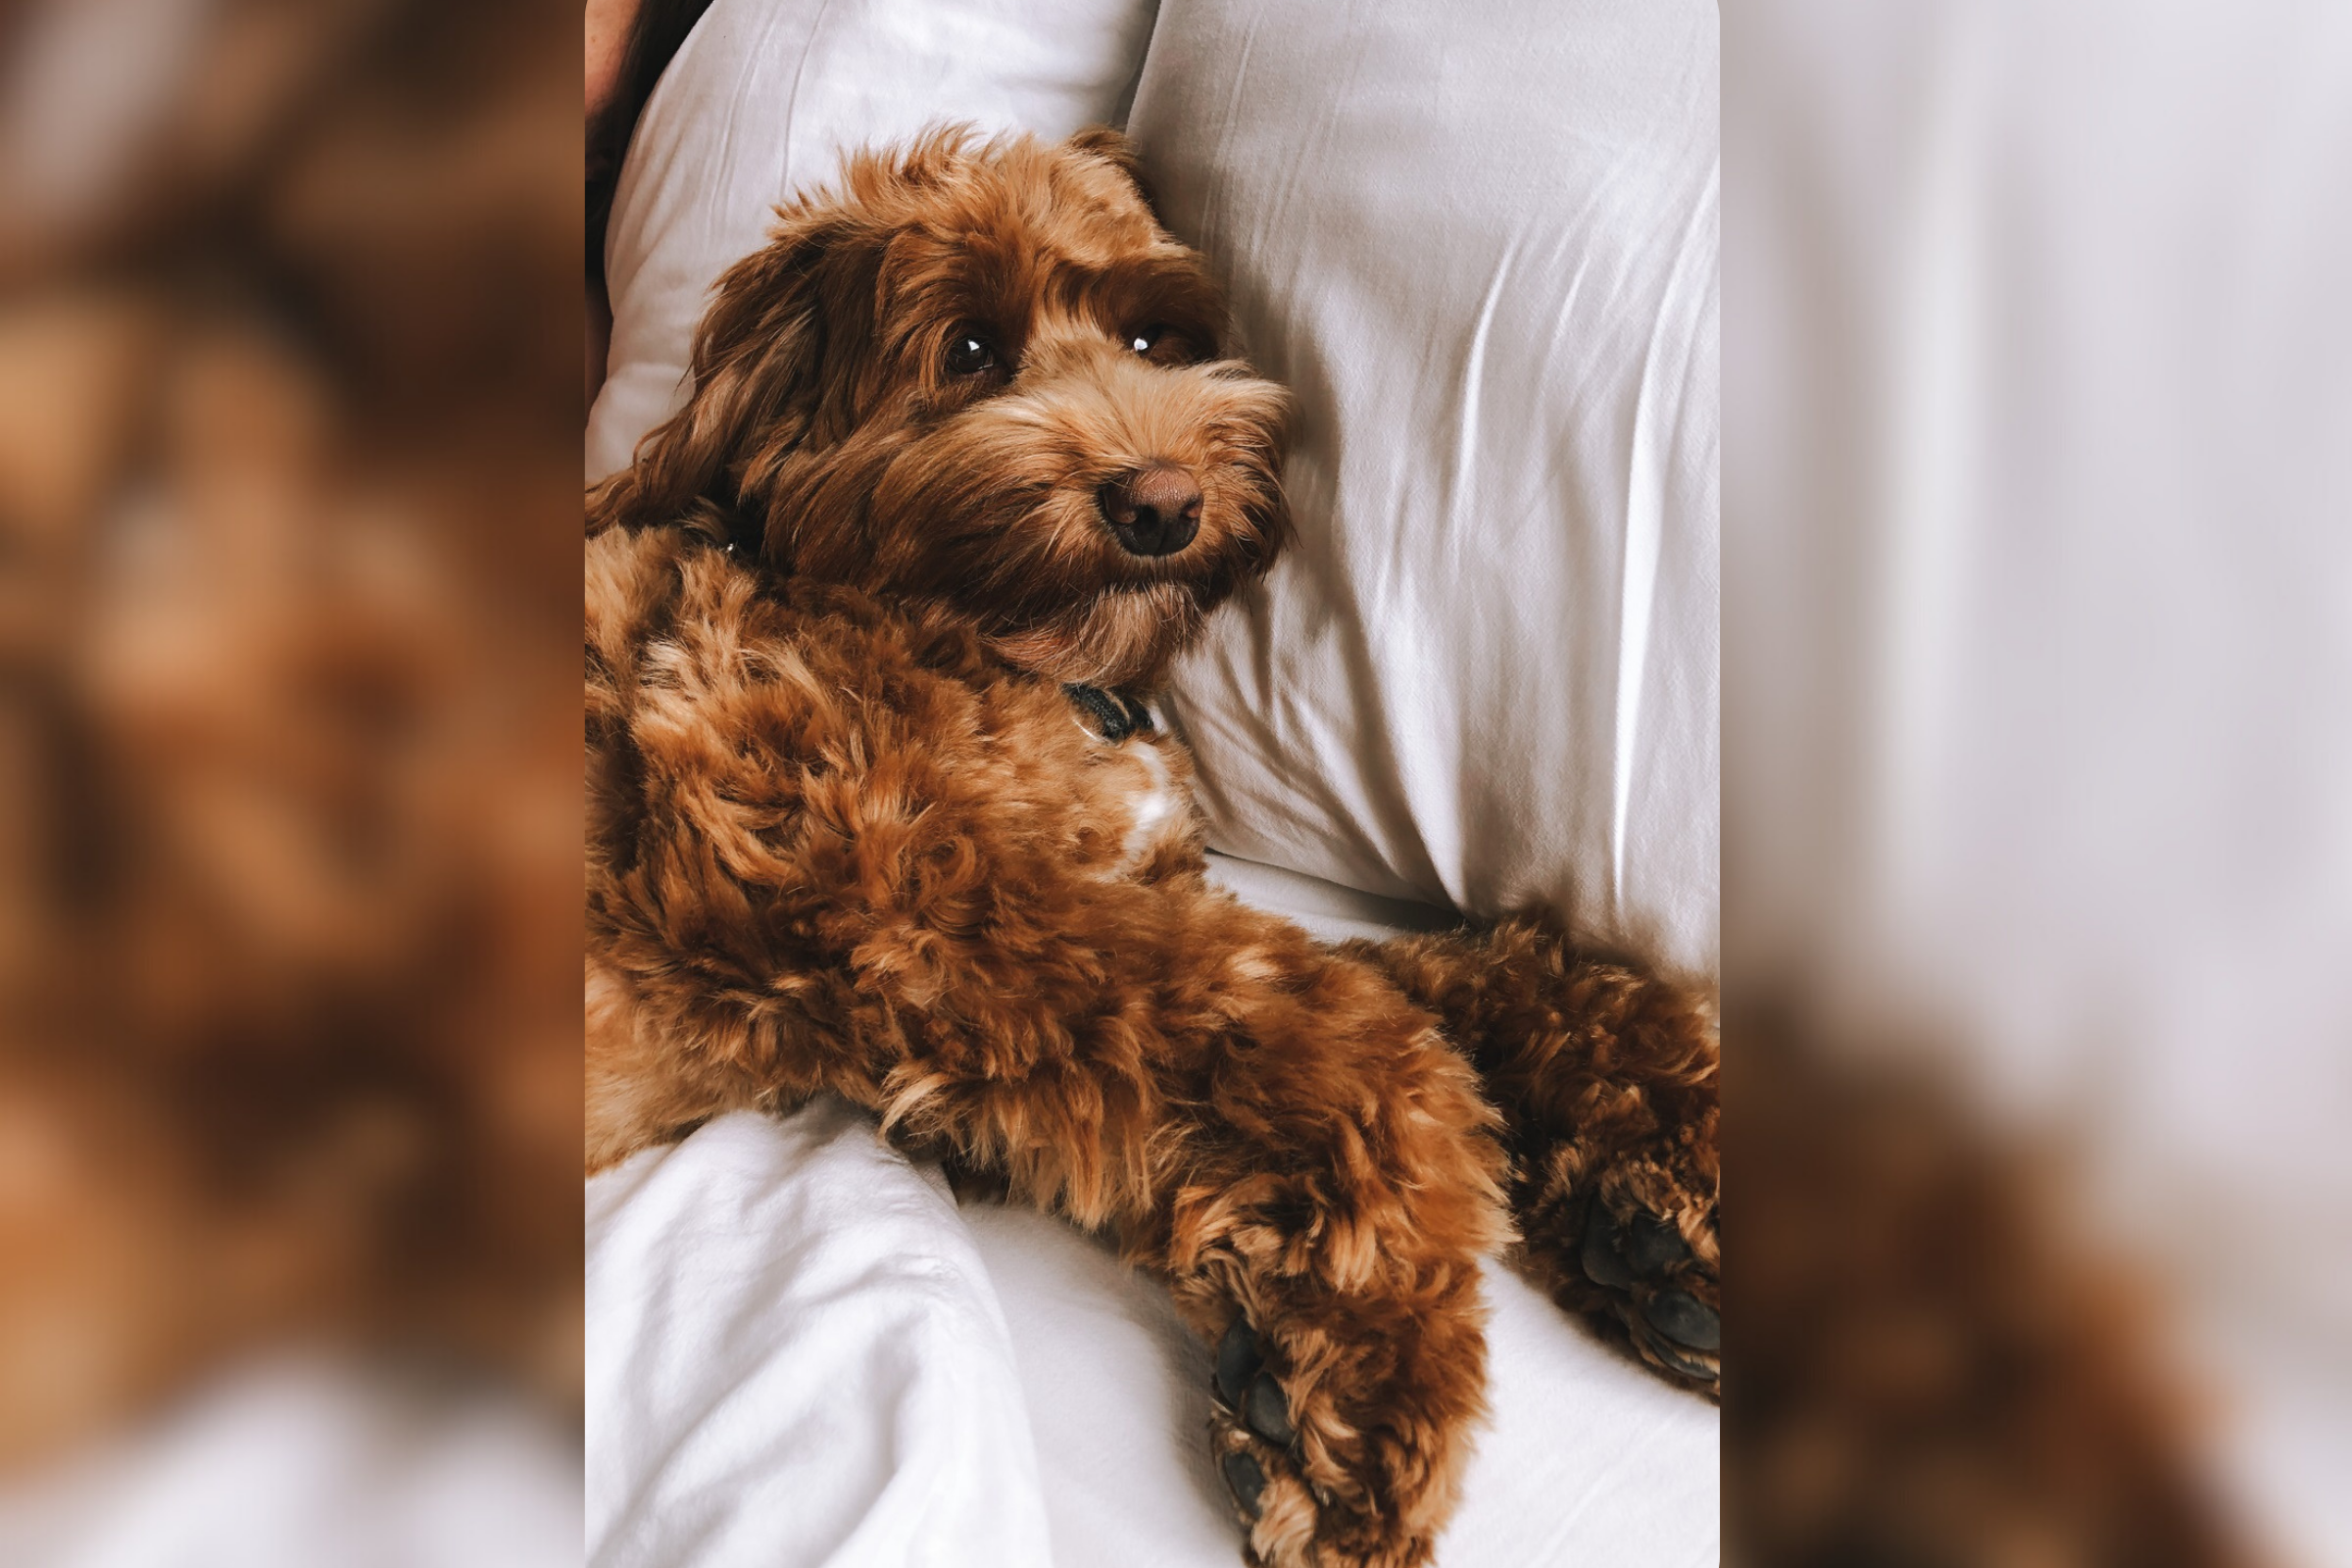 “Dramatic” labradoodle refusing to go to bed leaves internet in hysterics